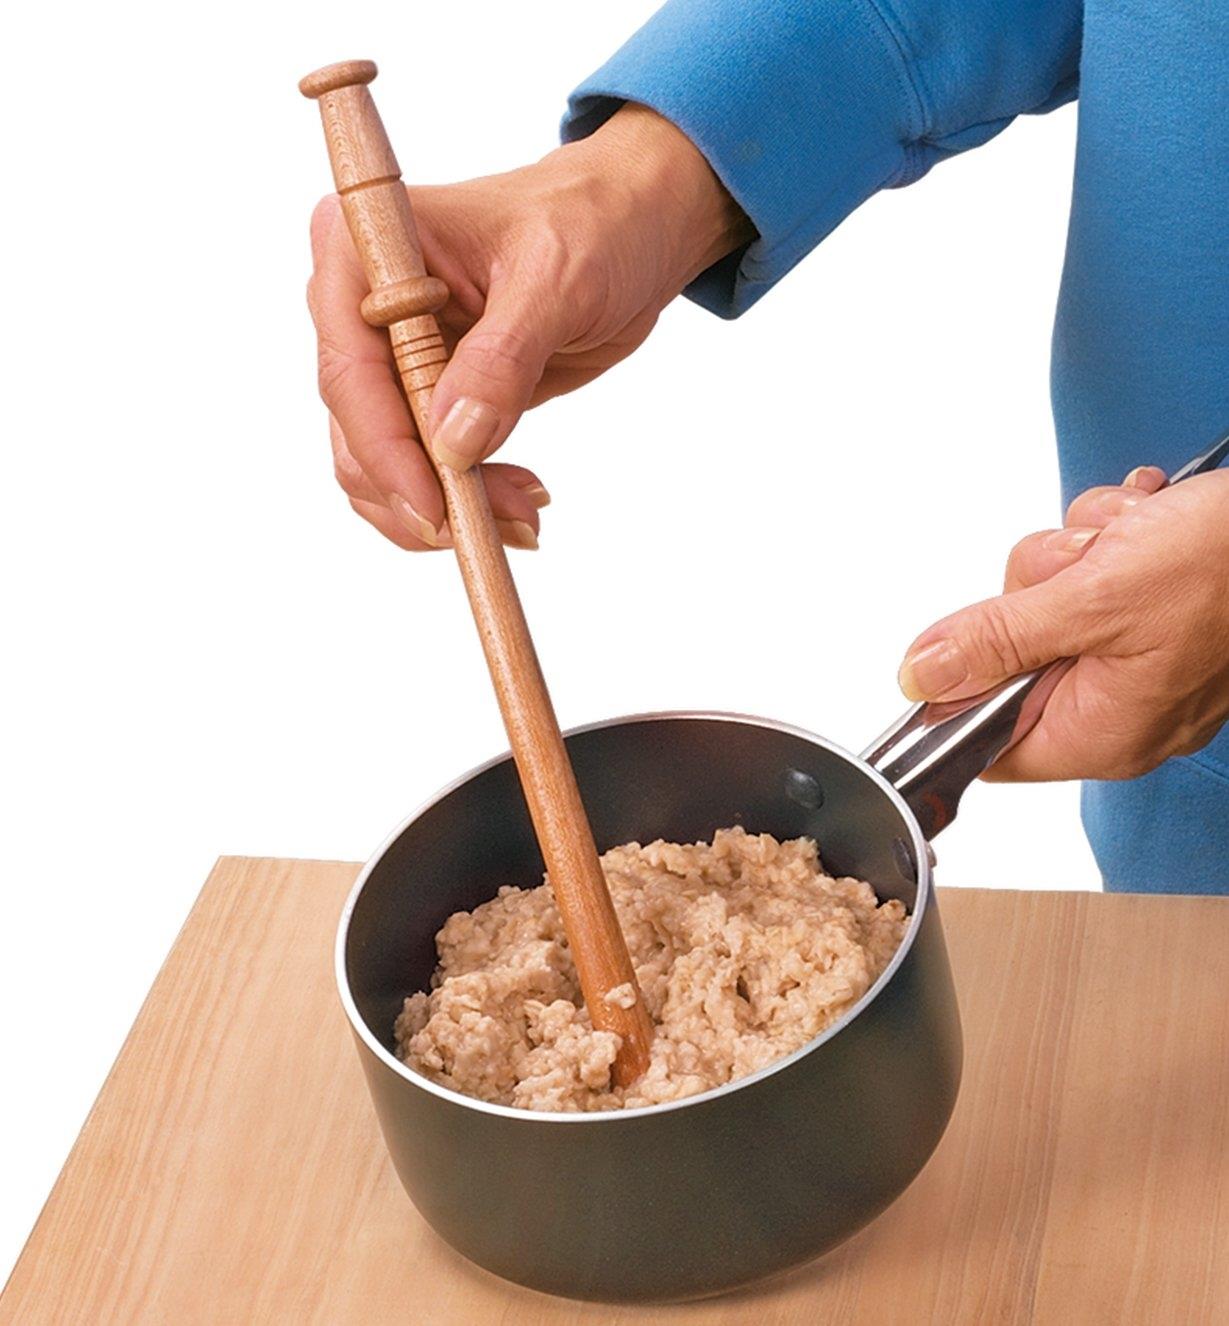 Mixing oatmeal in a pot with a Spurtle